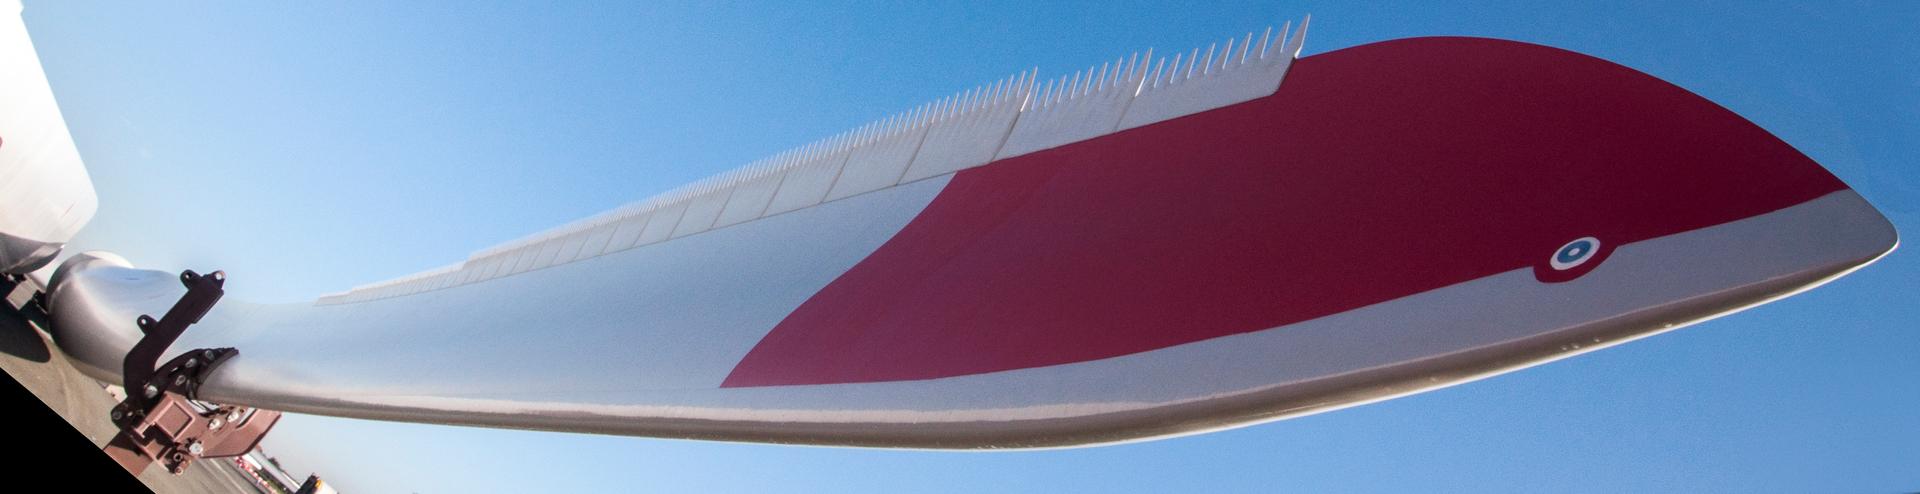 Siemens' wind turbine blades are manufactured from balsa wood and sheathed in fiberglass.